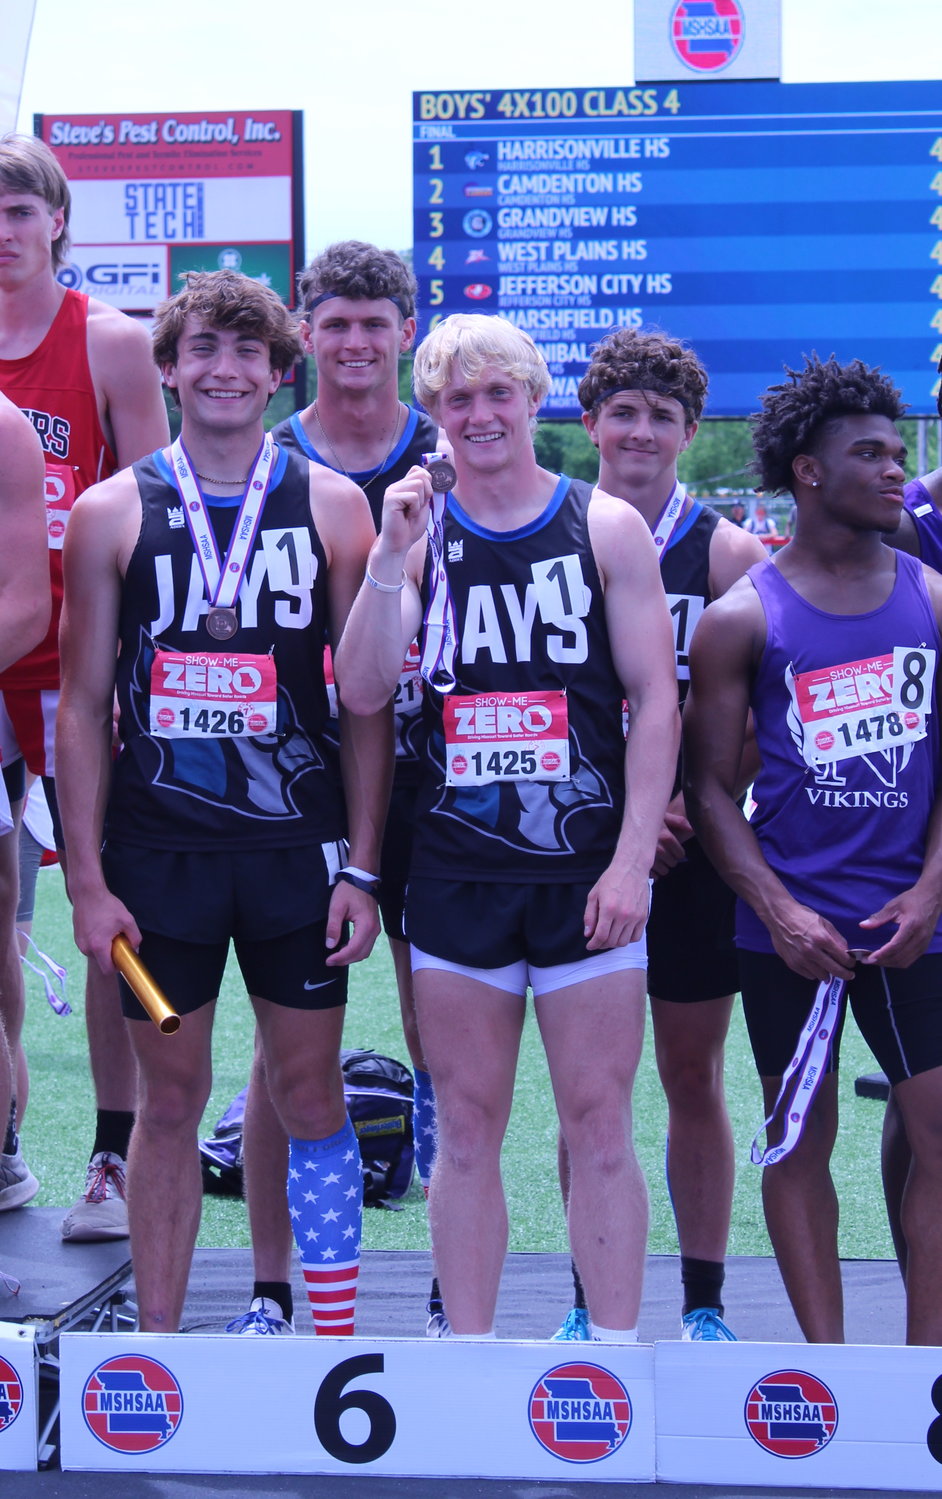 Both the 4X100M(6th) and 4X200M(5th) relay teams earned top spots on the podium at the MSHSAA Class 4 Track and Field Championship. (Front row, left to right) Peyton McBride and Cooper Kimrey. (Back row, left to right) Bryant Bull and Marcus Blackstock.